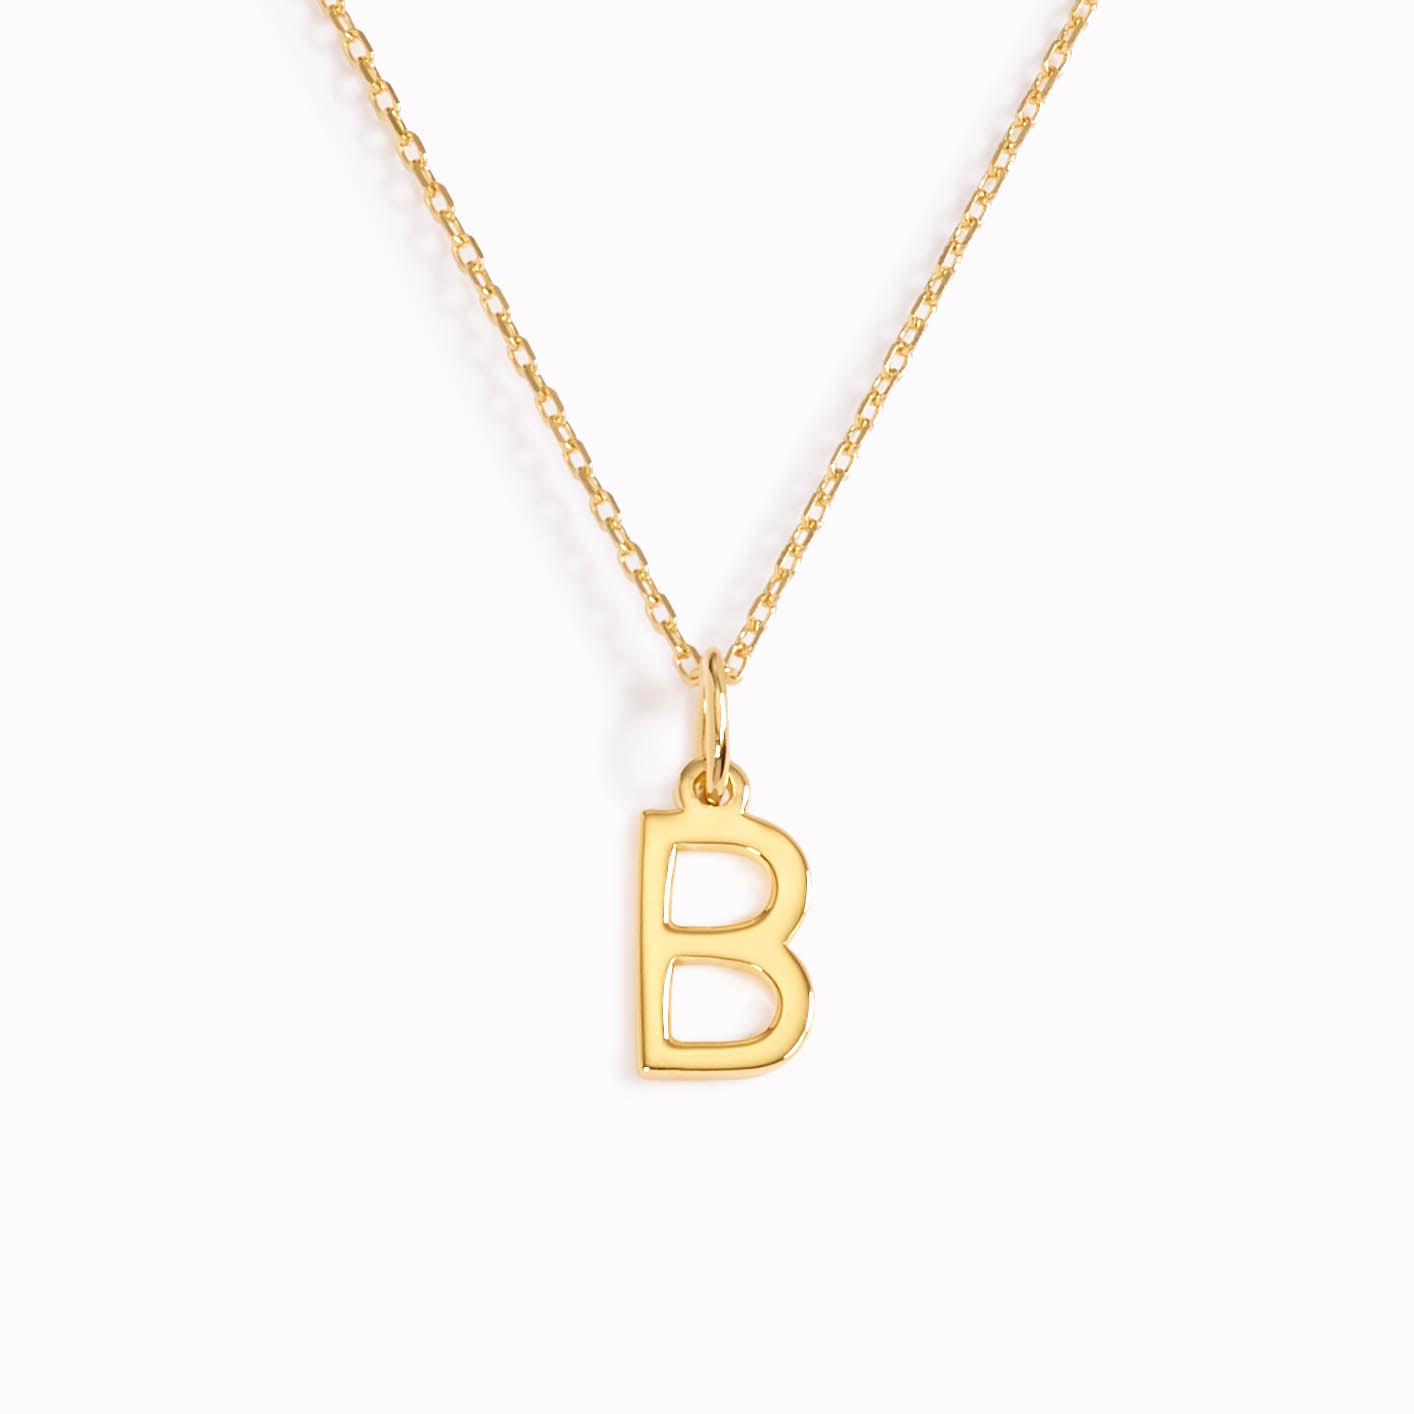 Shahi Jewelry California - Initial Letter B Necklace with Diamonds in 10K  Solid